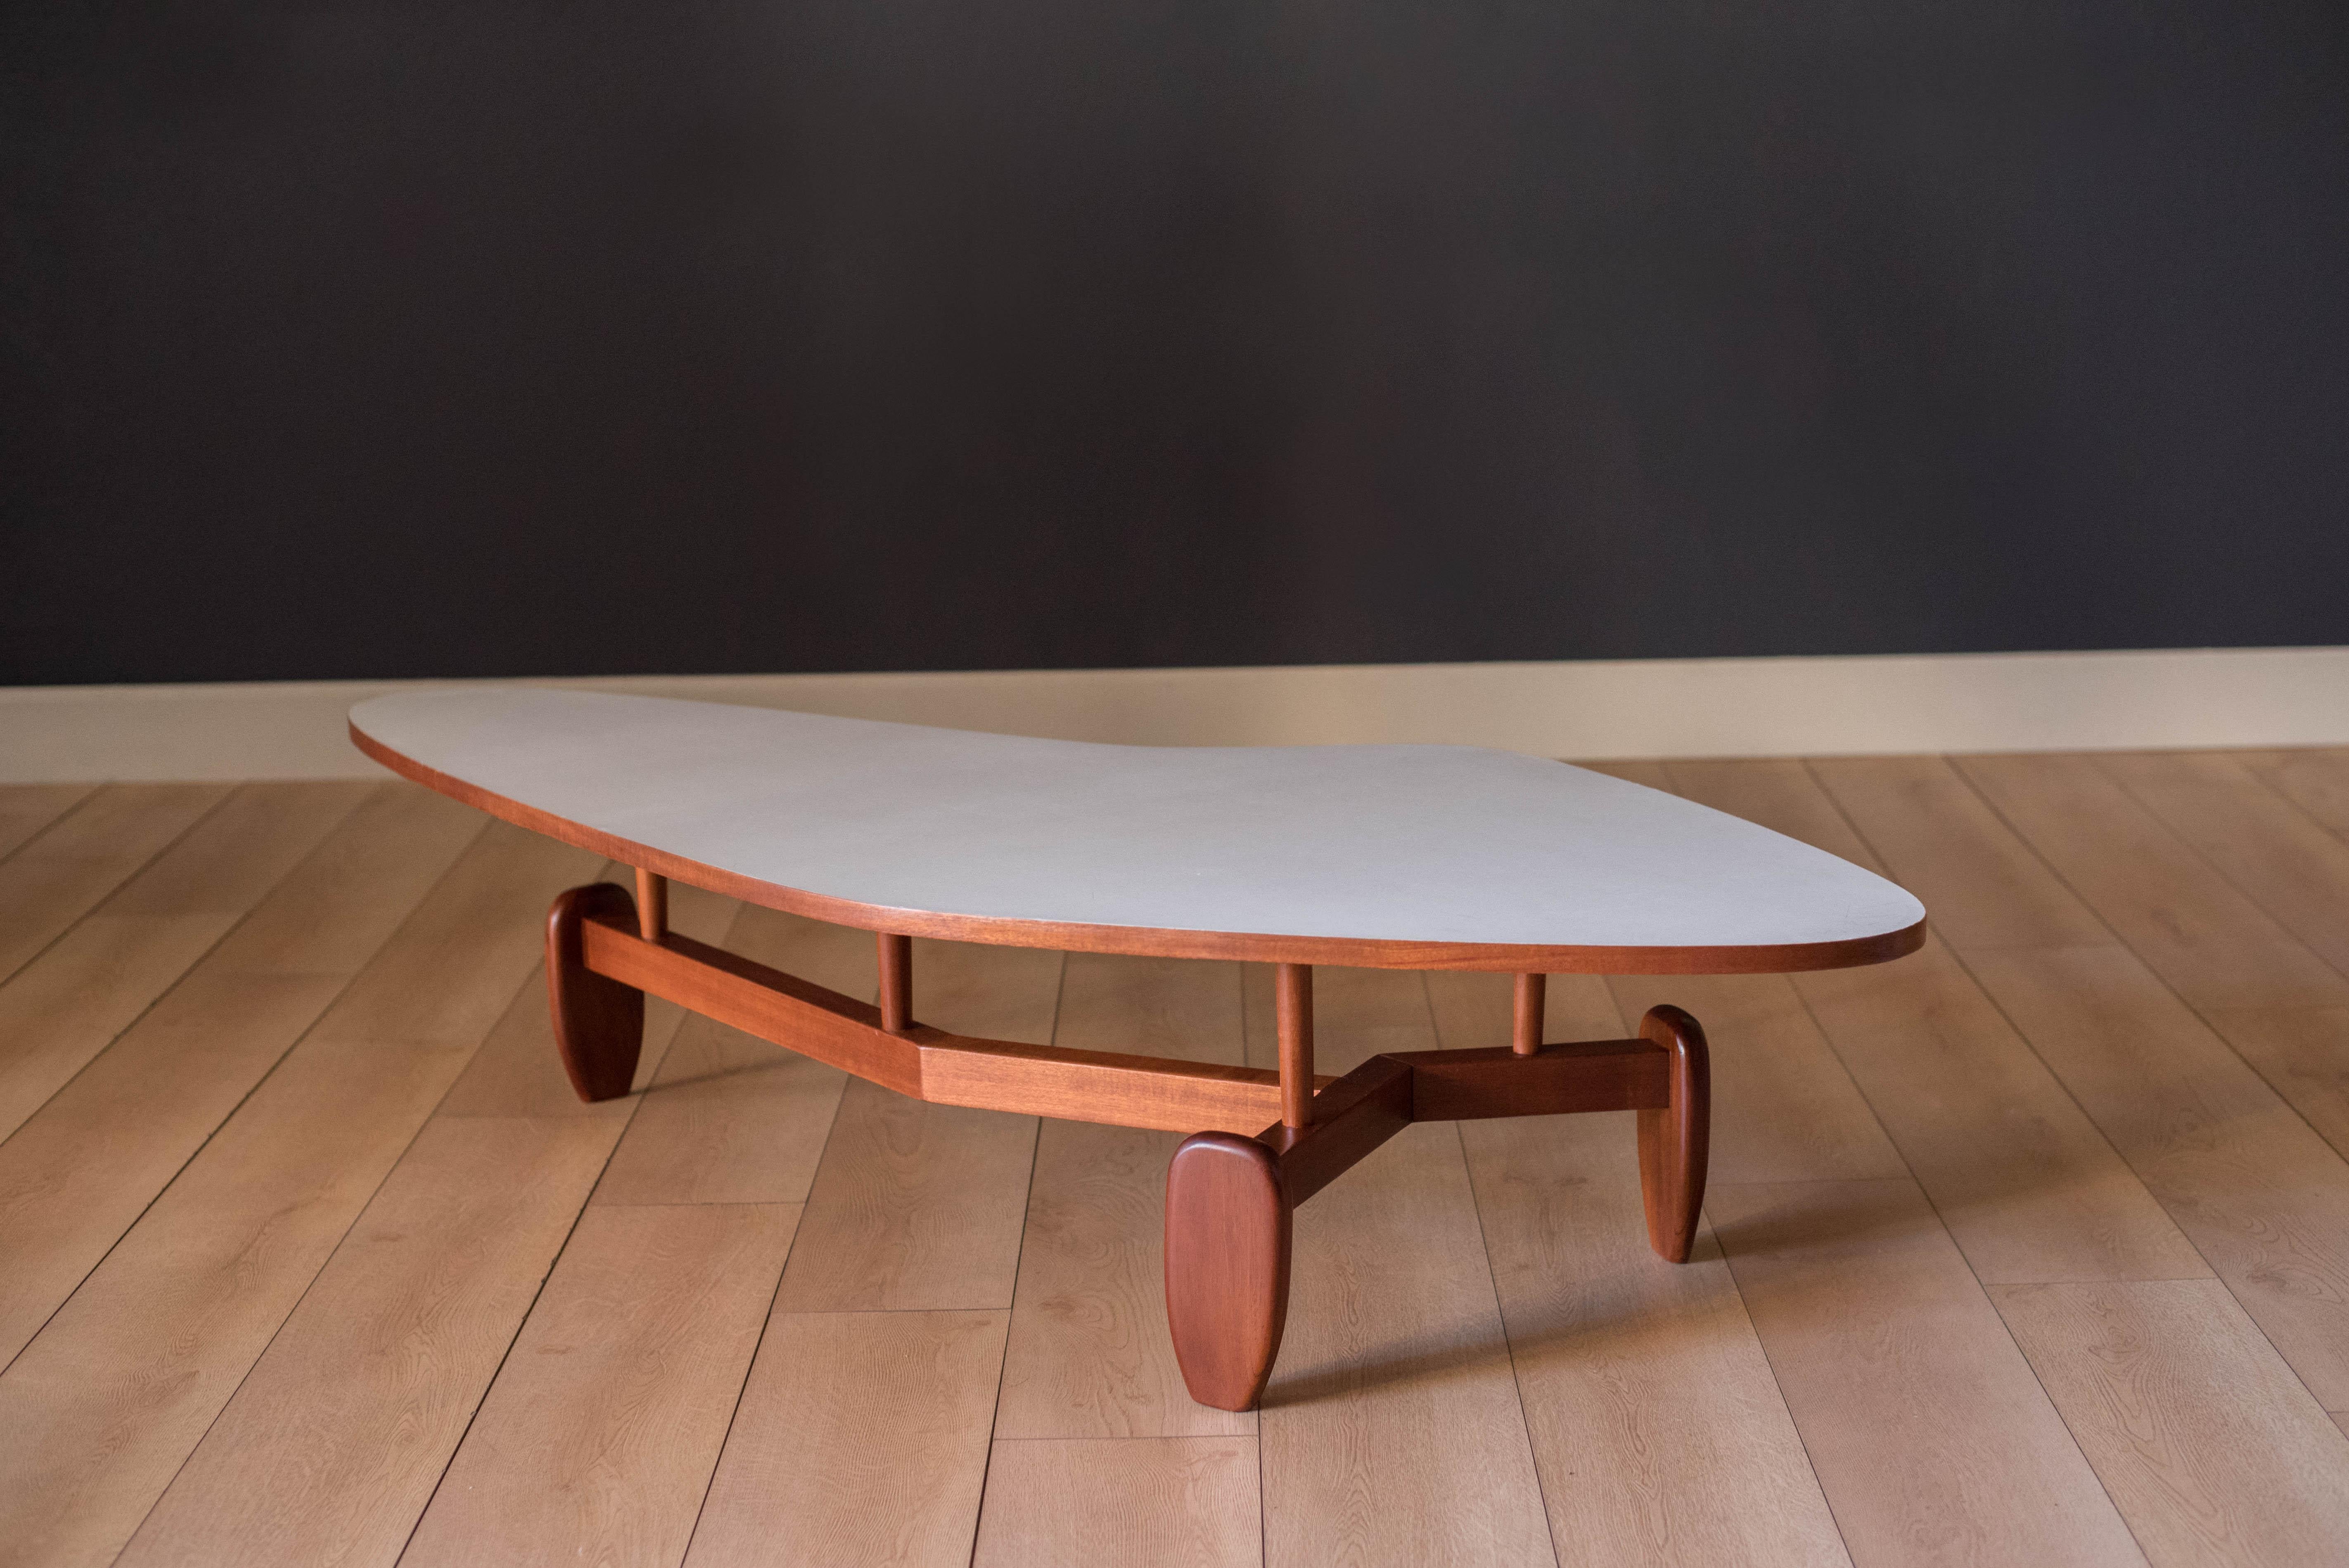 outrigger table